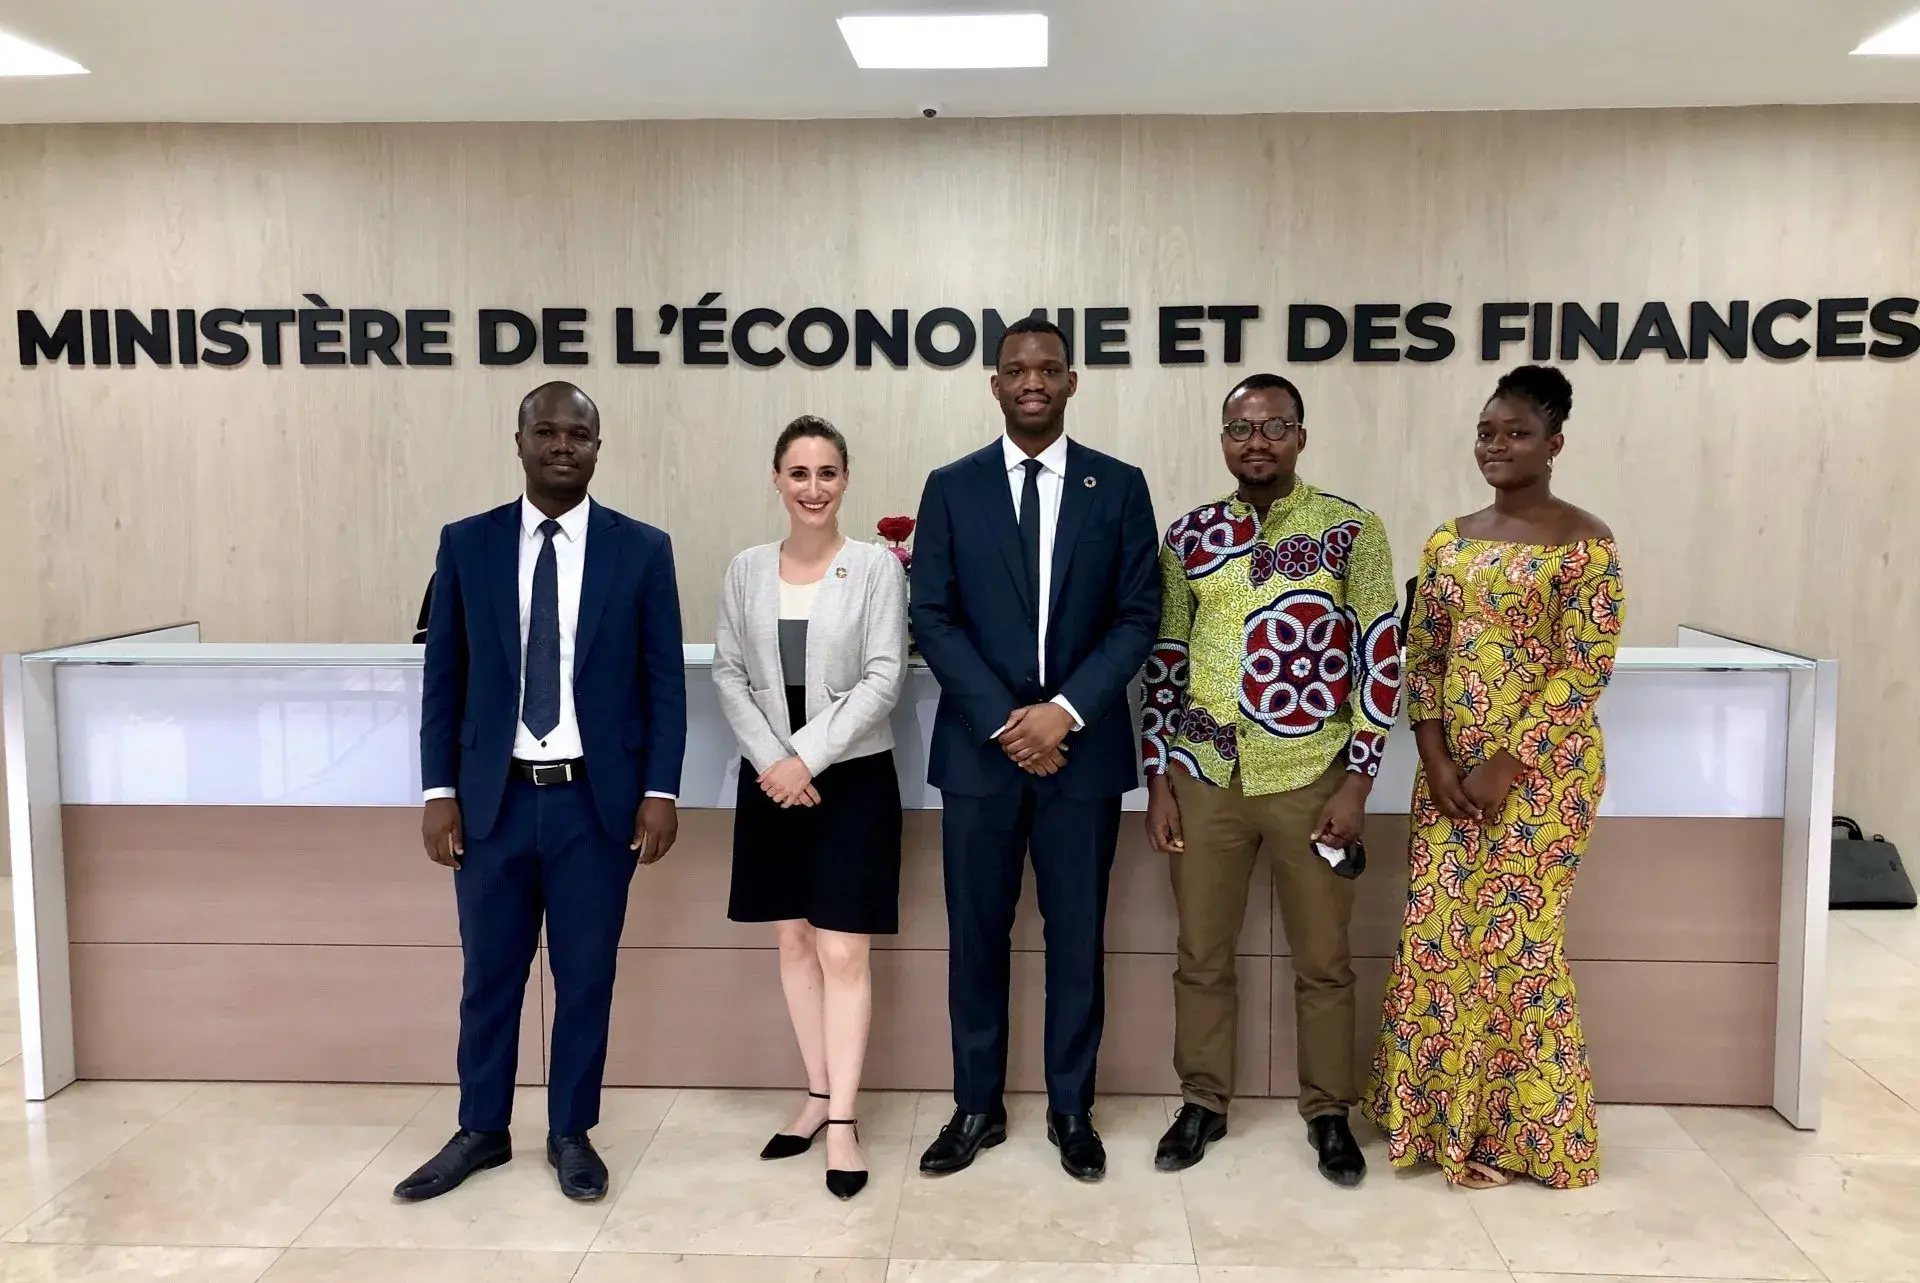 SDSN’s team for Benin SDG project with the SDG Bond Monitoring Unit of the Ministry of Economy and Finance of Benin.